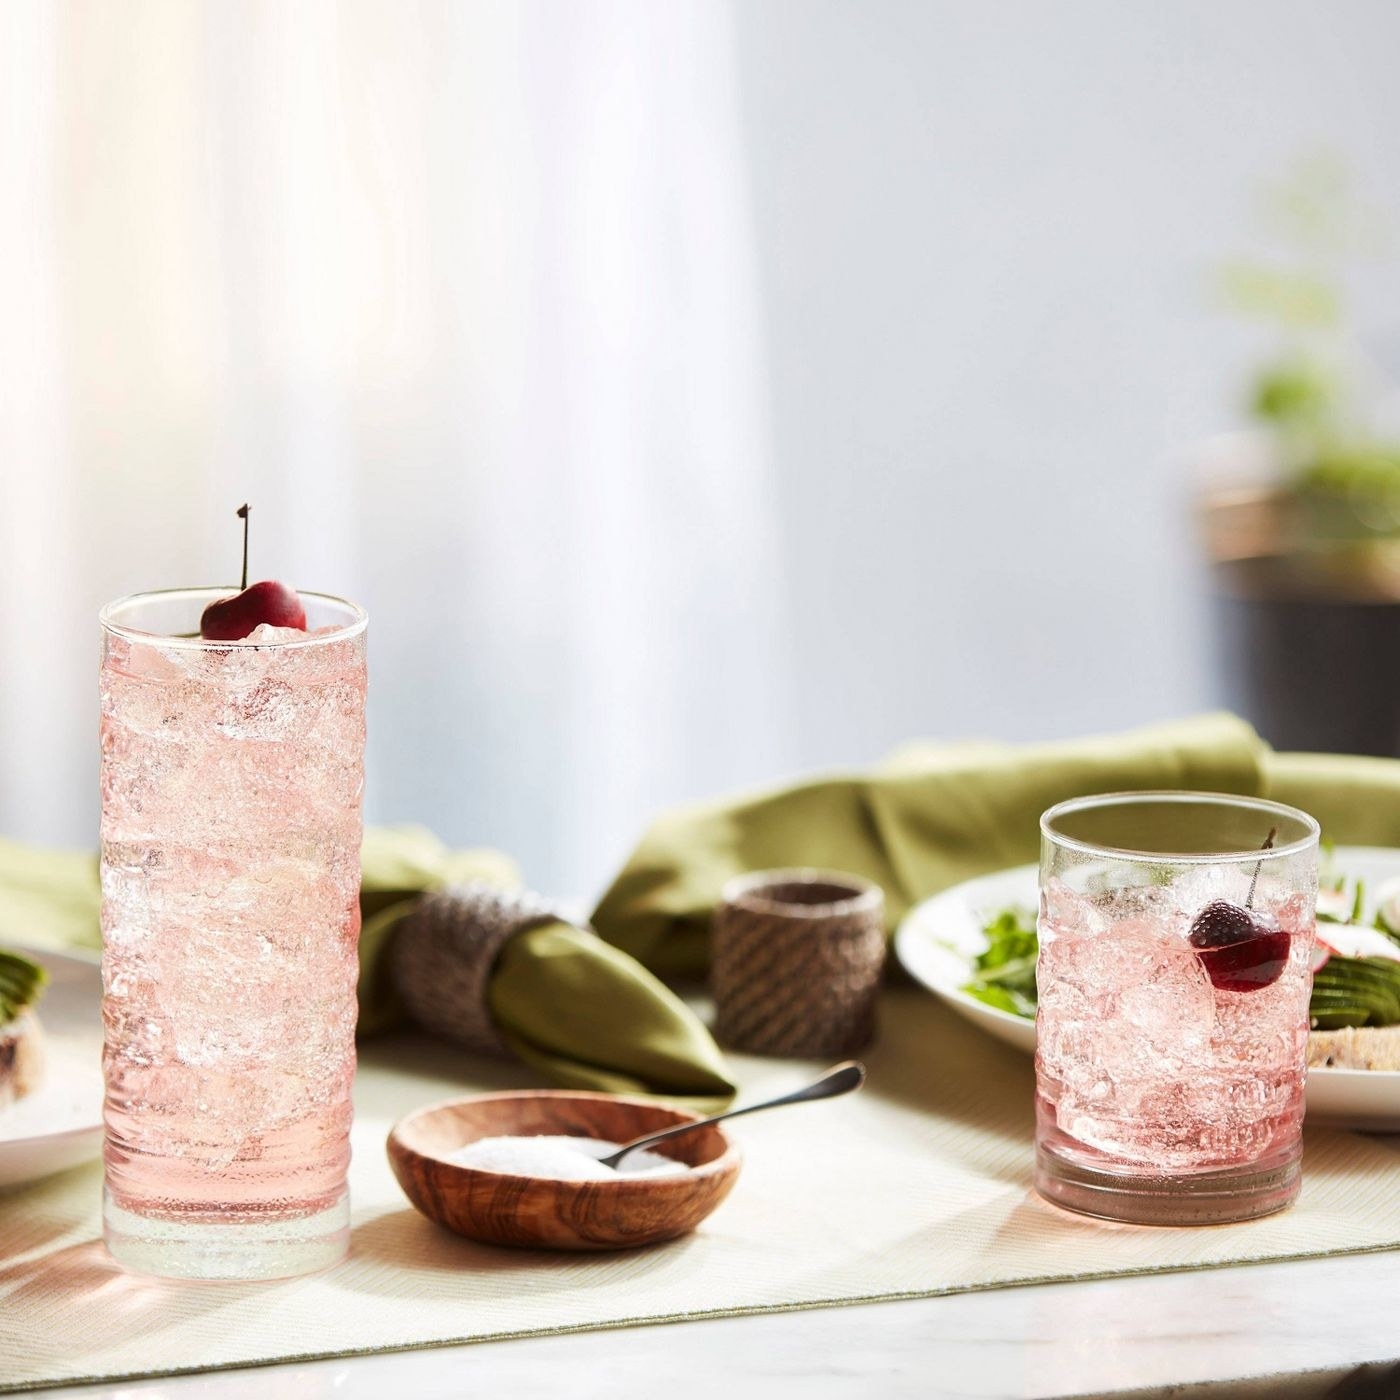 Two textured glasses with a fizzy drink and cherries